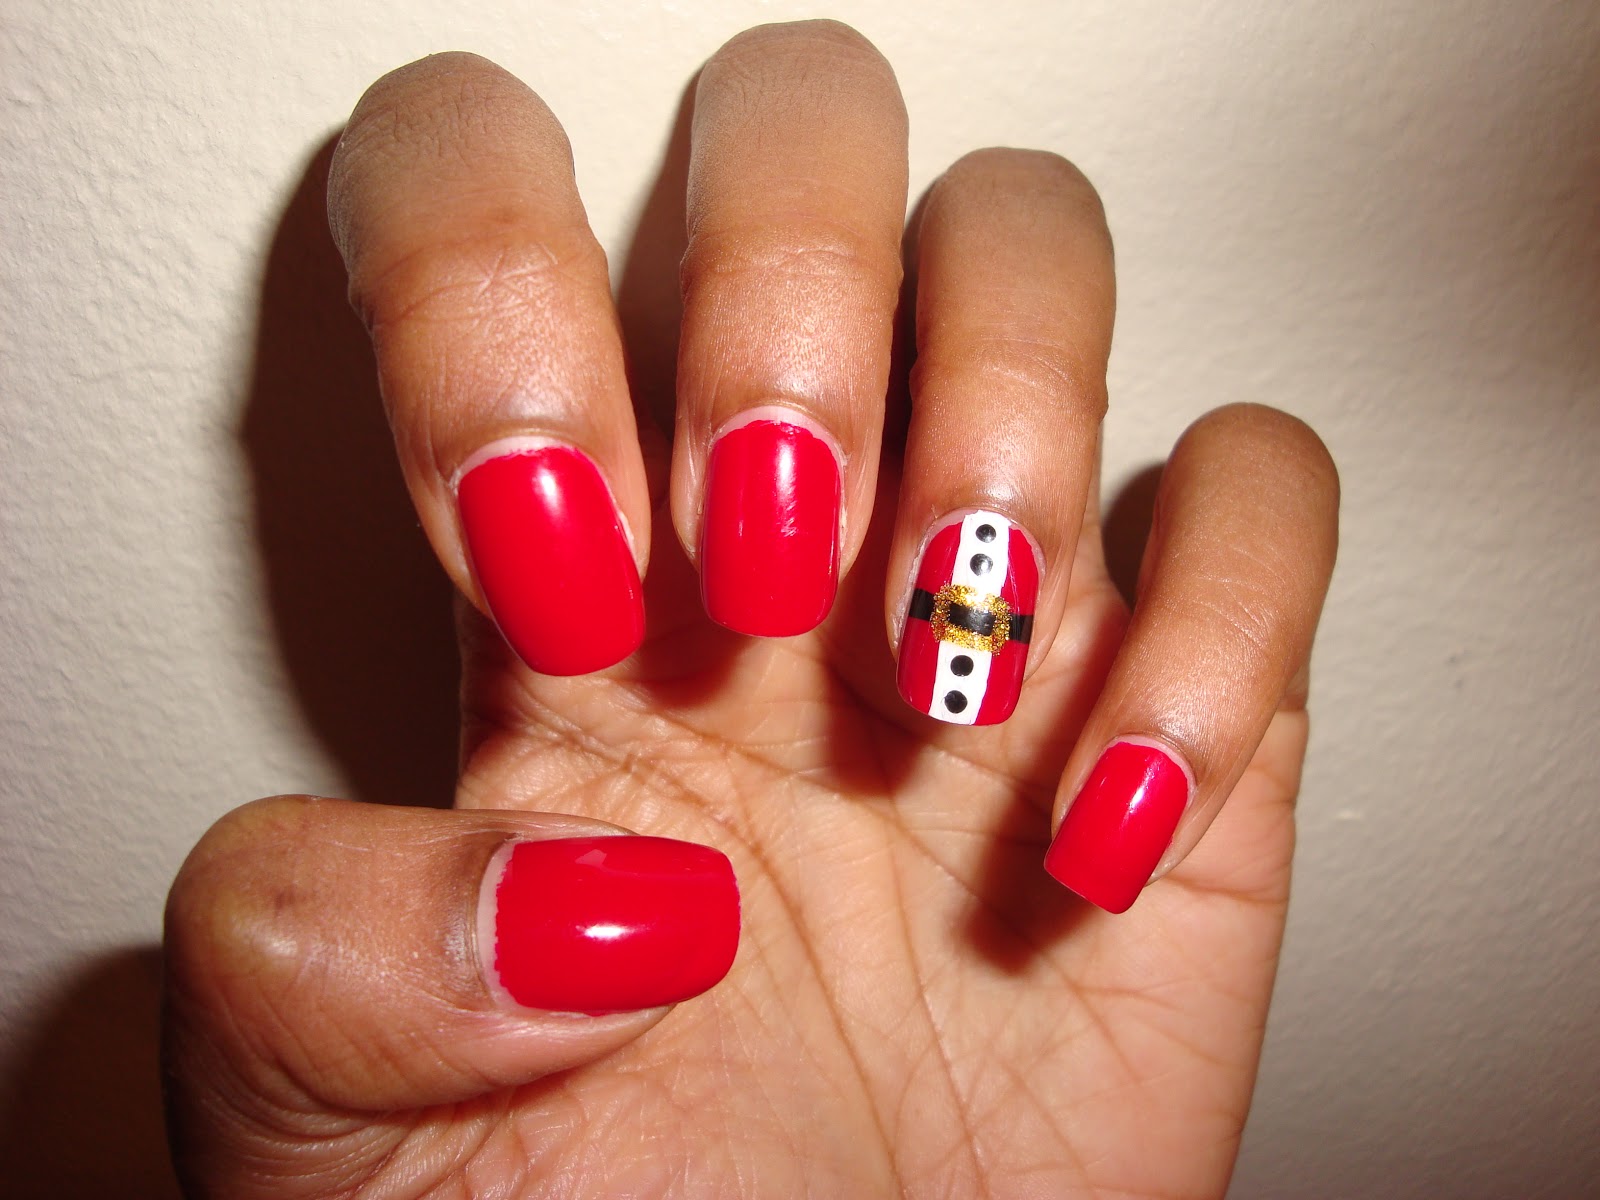 1. "Cute Christmas Nail Designs on Tumblr" - wide 9